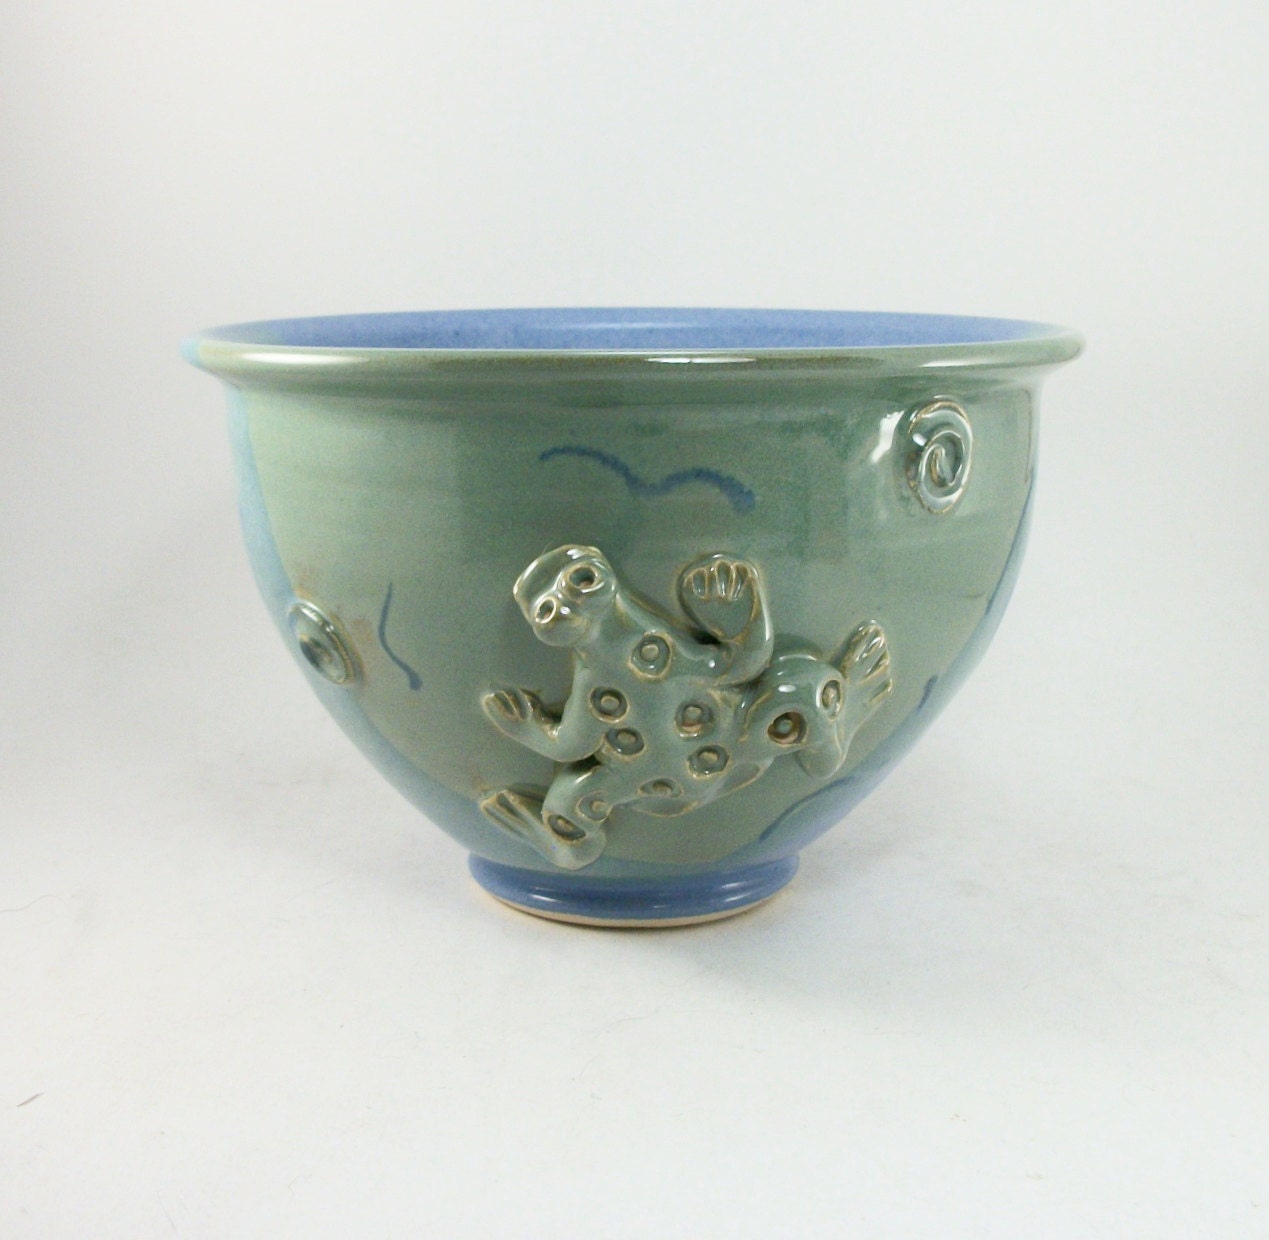 biggish medium sized blue and green bowl with a frog